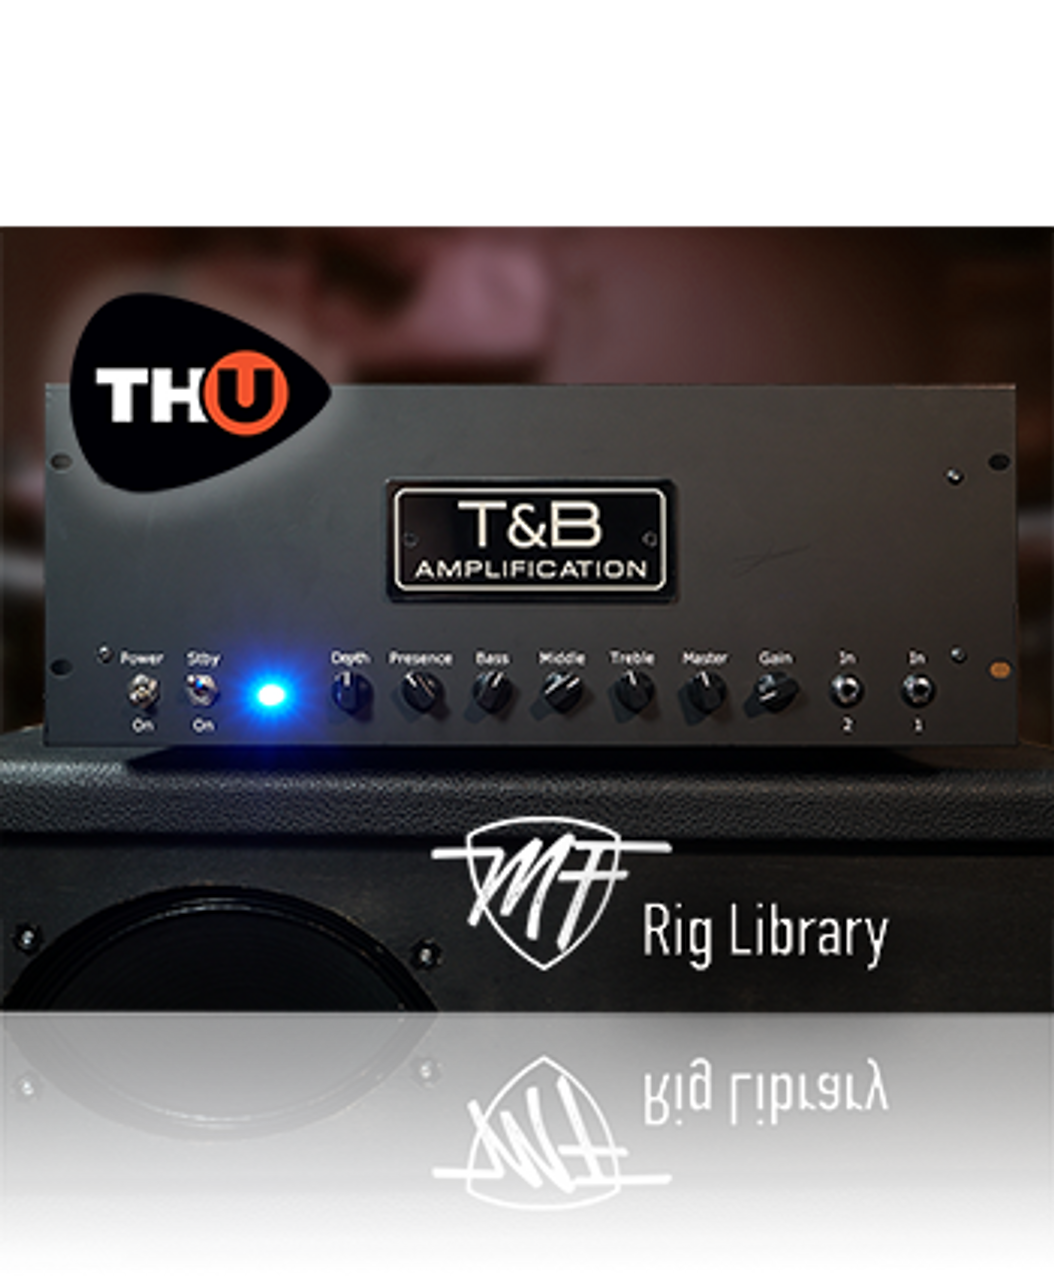 MF T&B 008 - Rig Library for TH-U